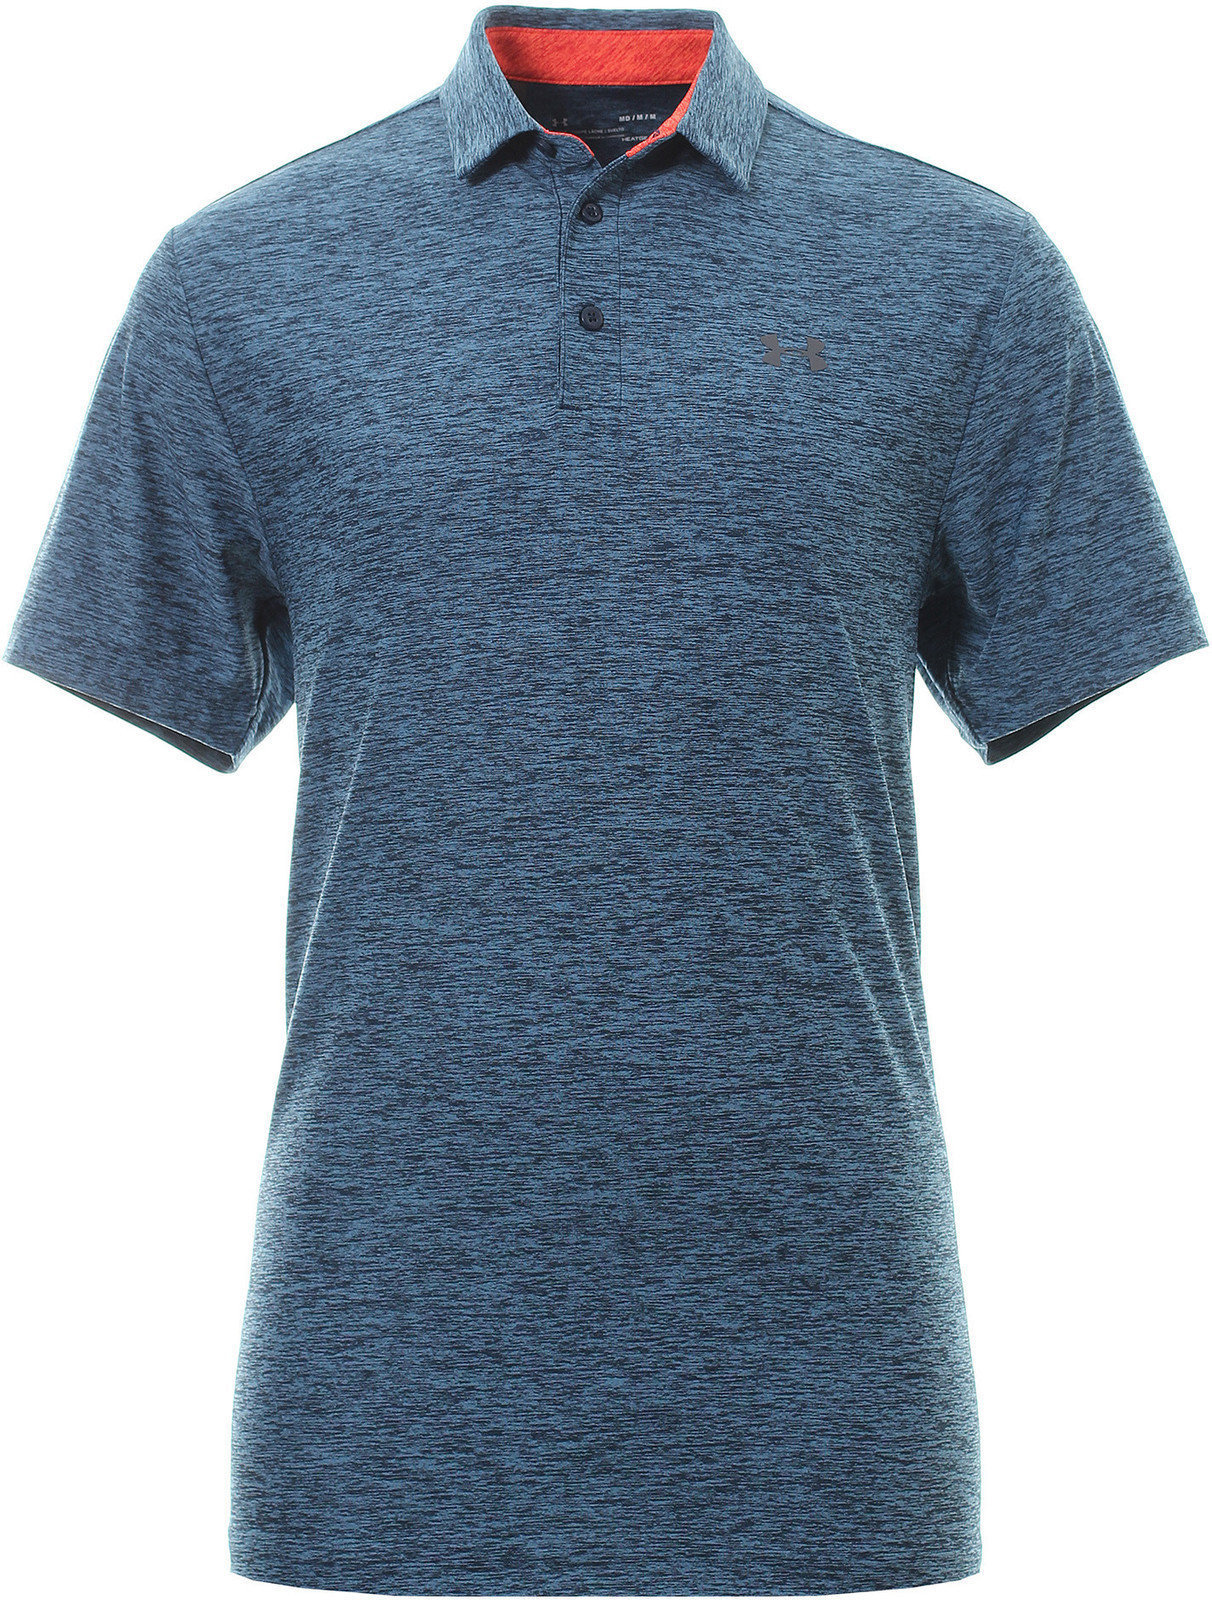 Polo Shirt Under Armour Playoff Polo Navy Heather M